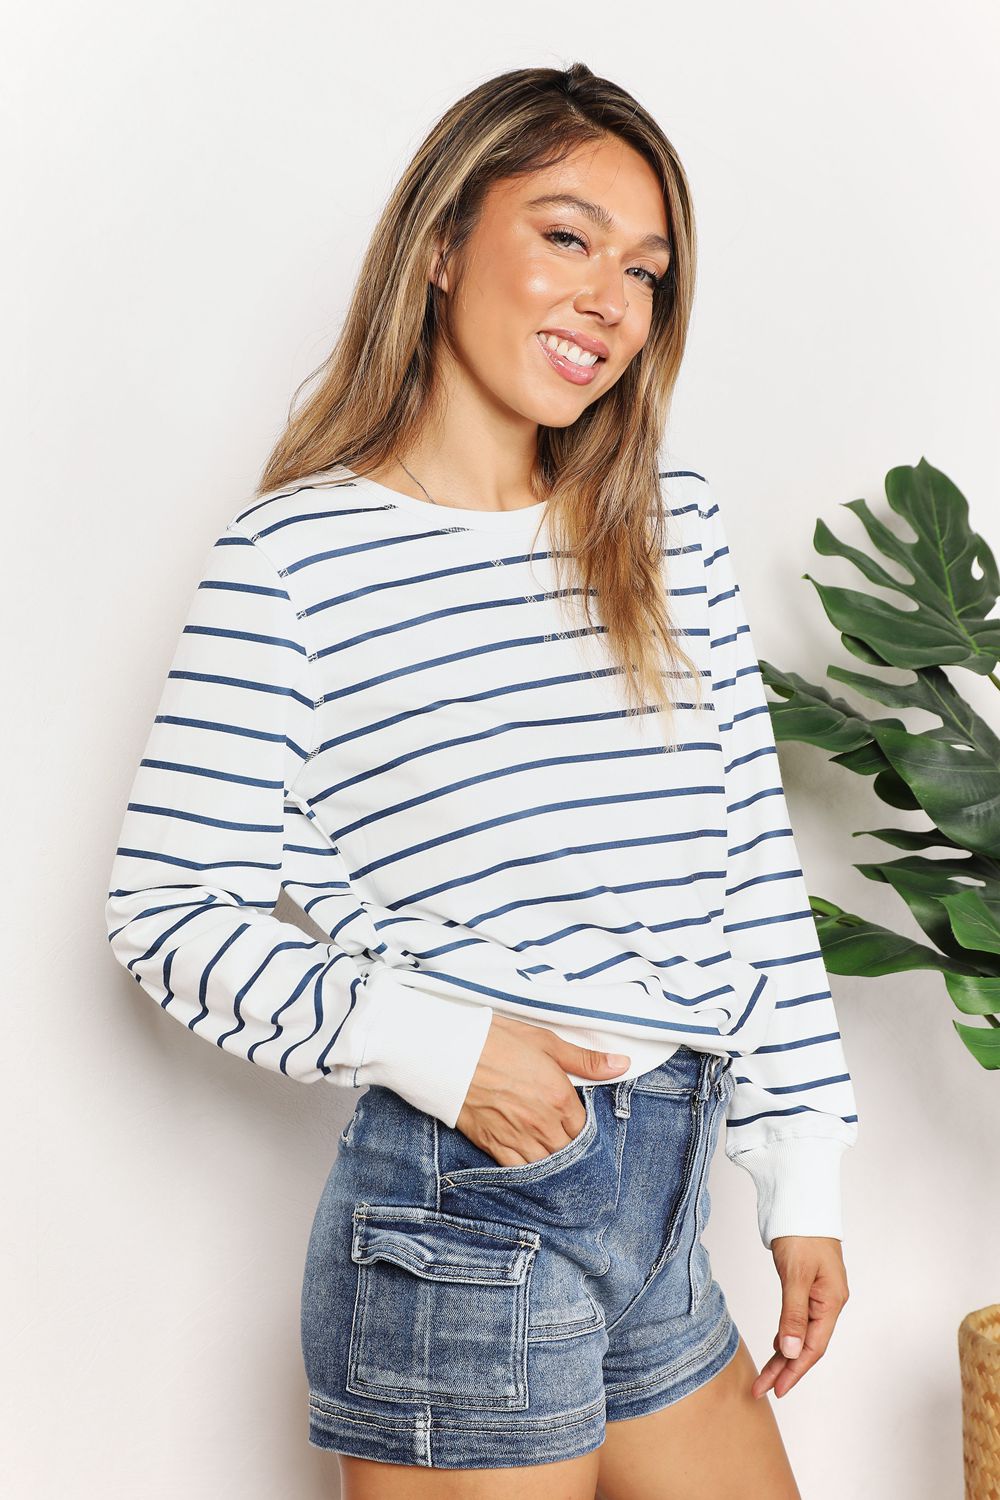 Double Take Striped Long Sleeve Top Shirts & Tops RYSE Clothing Co.   